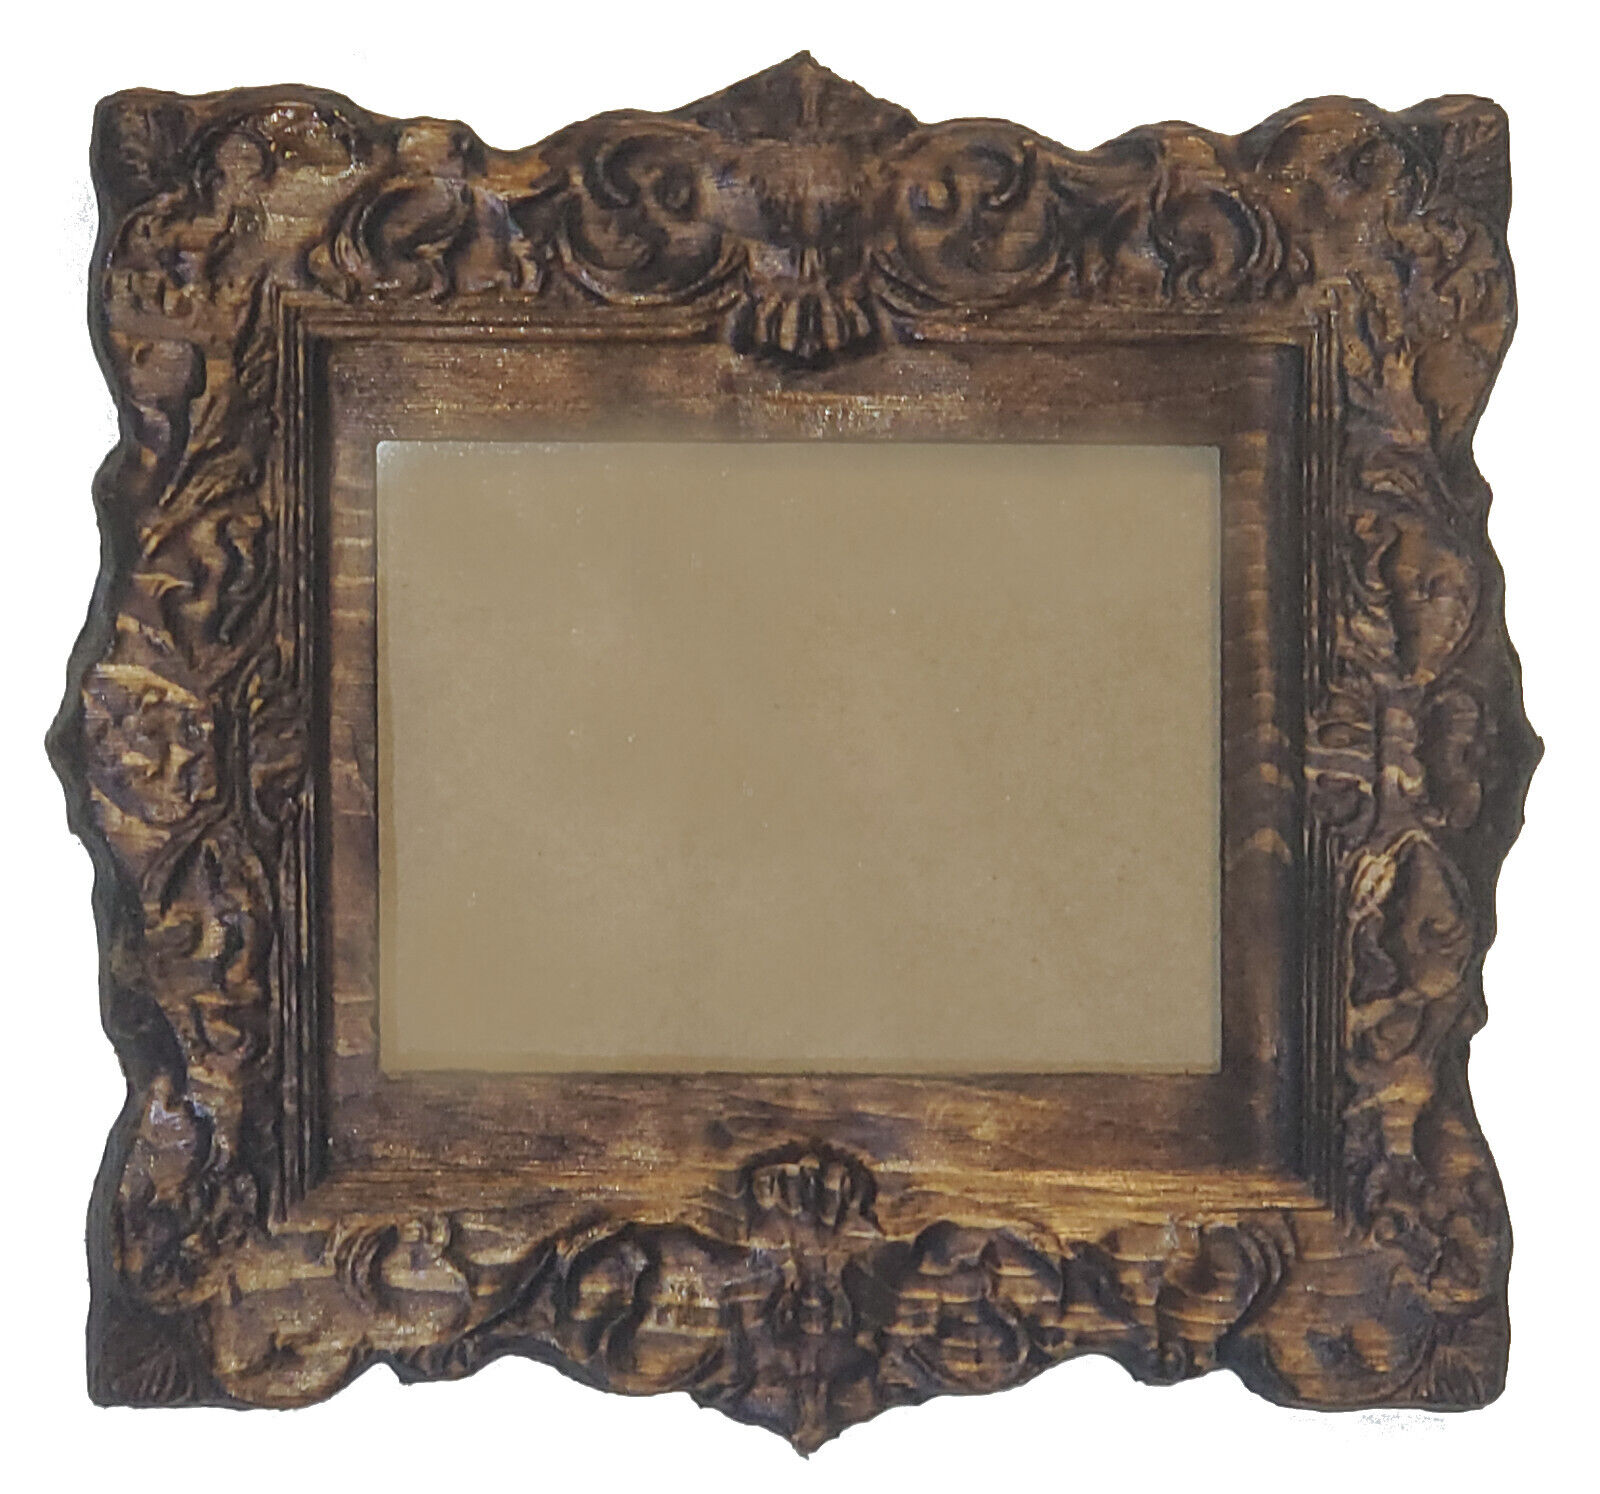 5x7 Ornate 100% Real Wood Antique Picture Frame Unique Carved and Old Fashioned